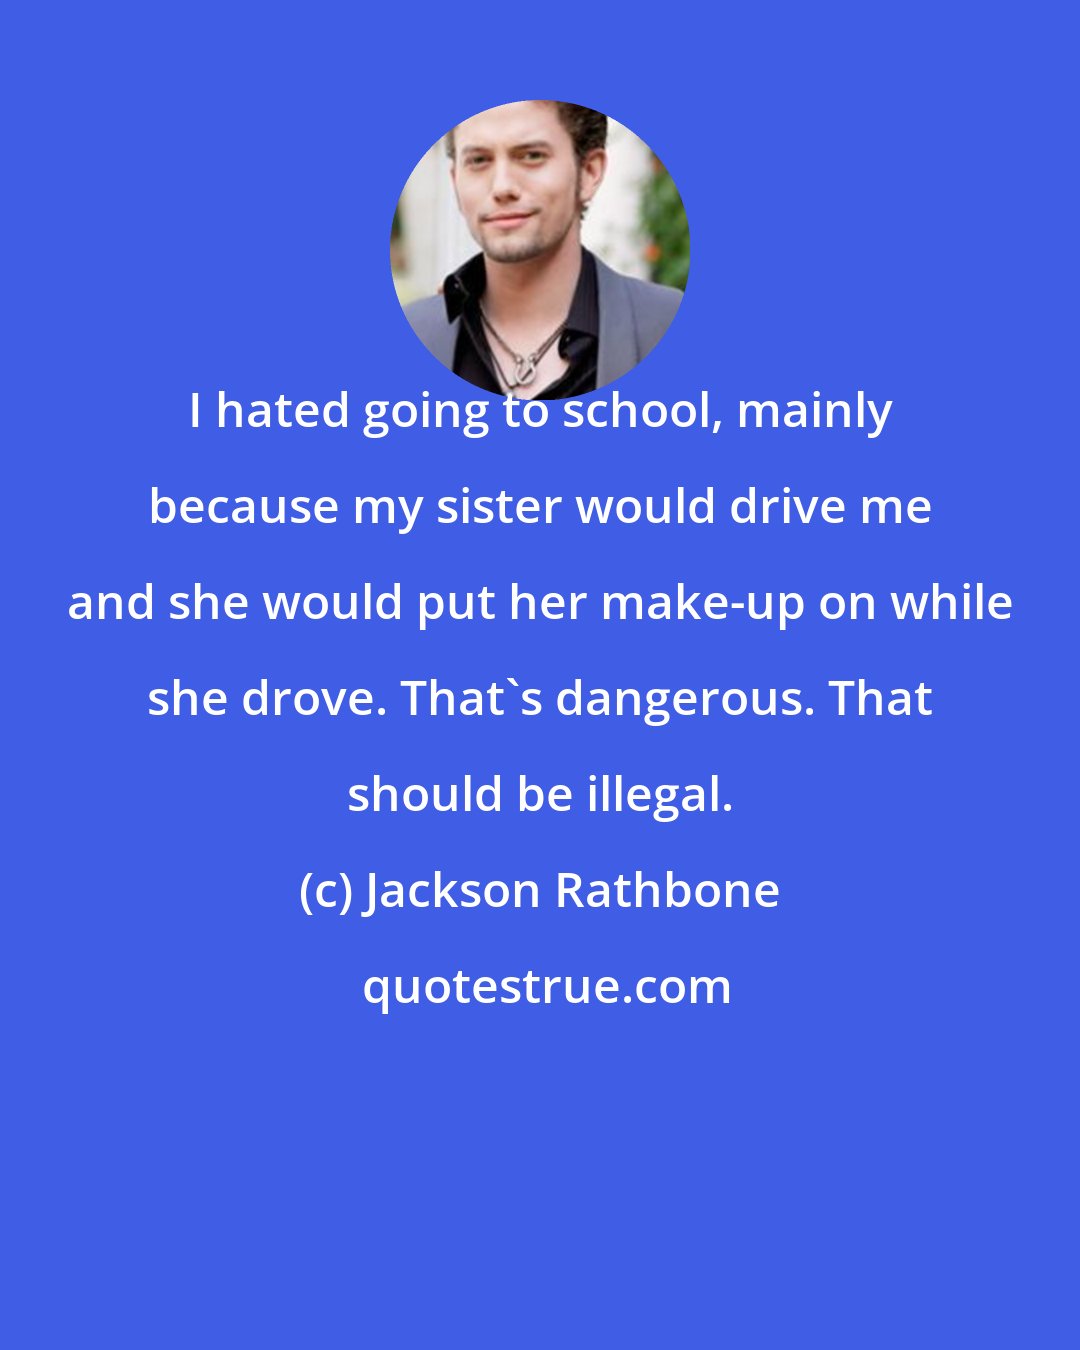 Jackson Rathbone: I hated going to school, mainly because my sister would drive me and she would put her make-up on while she drove. That's dangerous. That should be illegal.